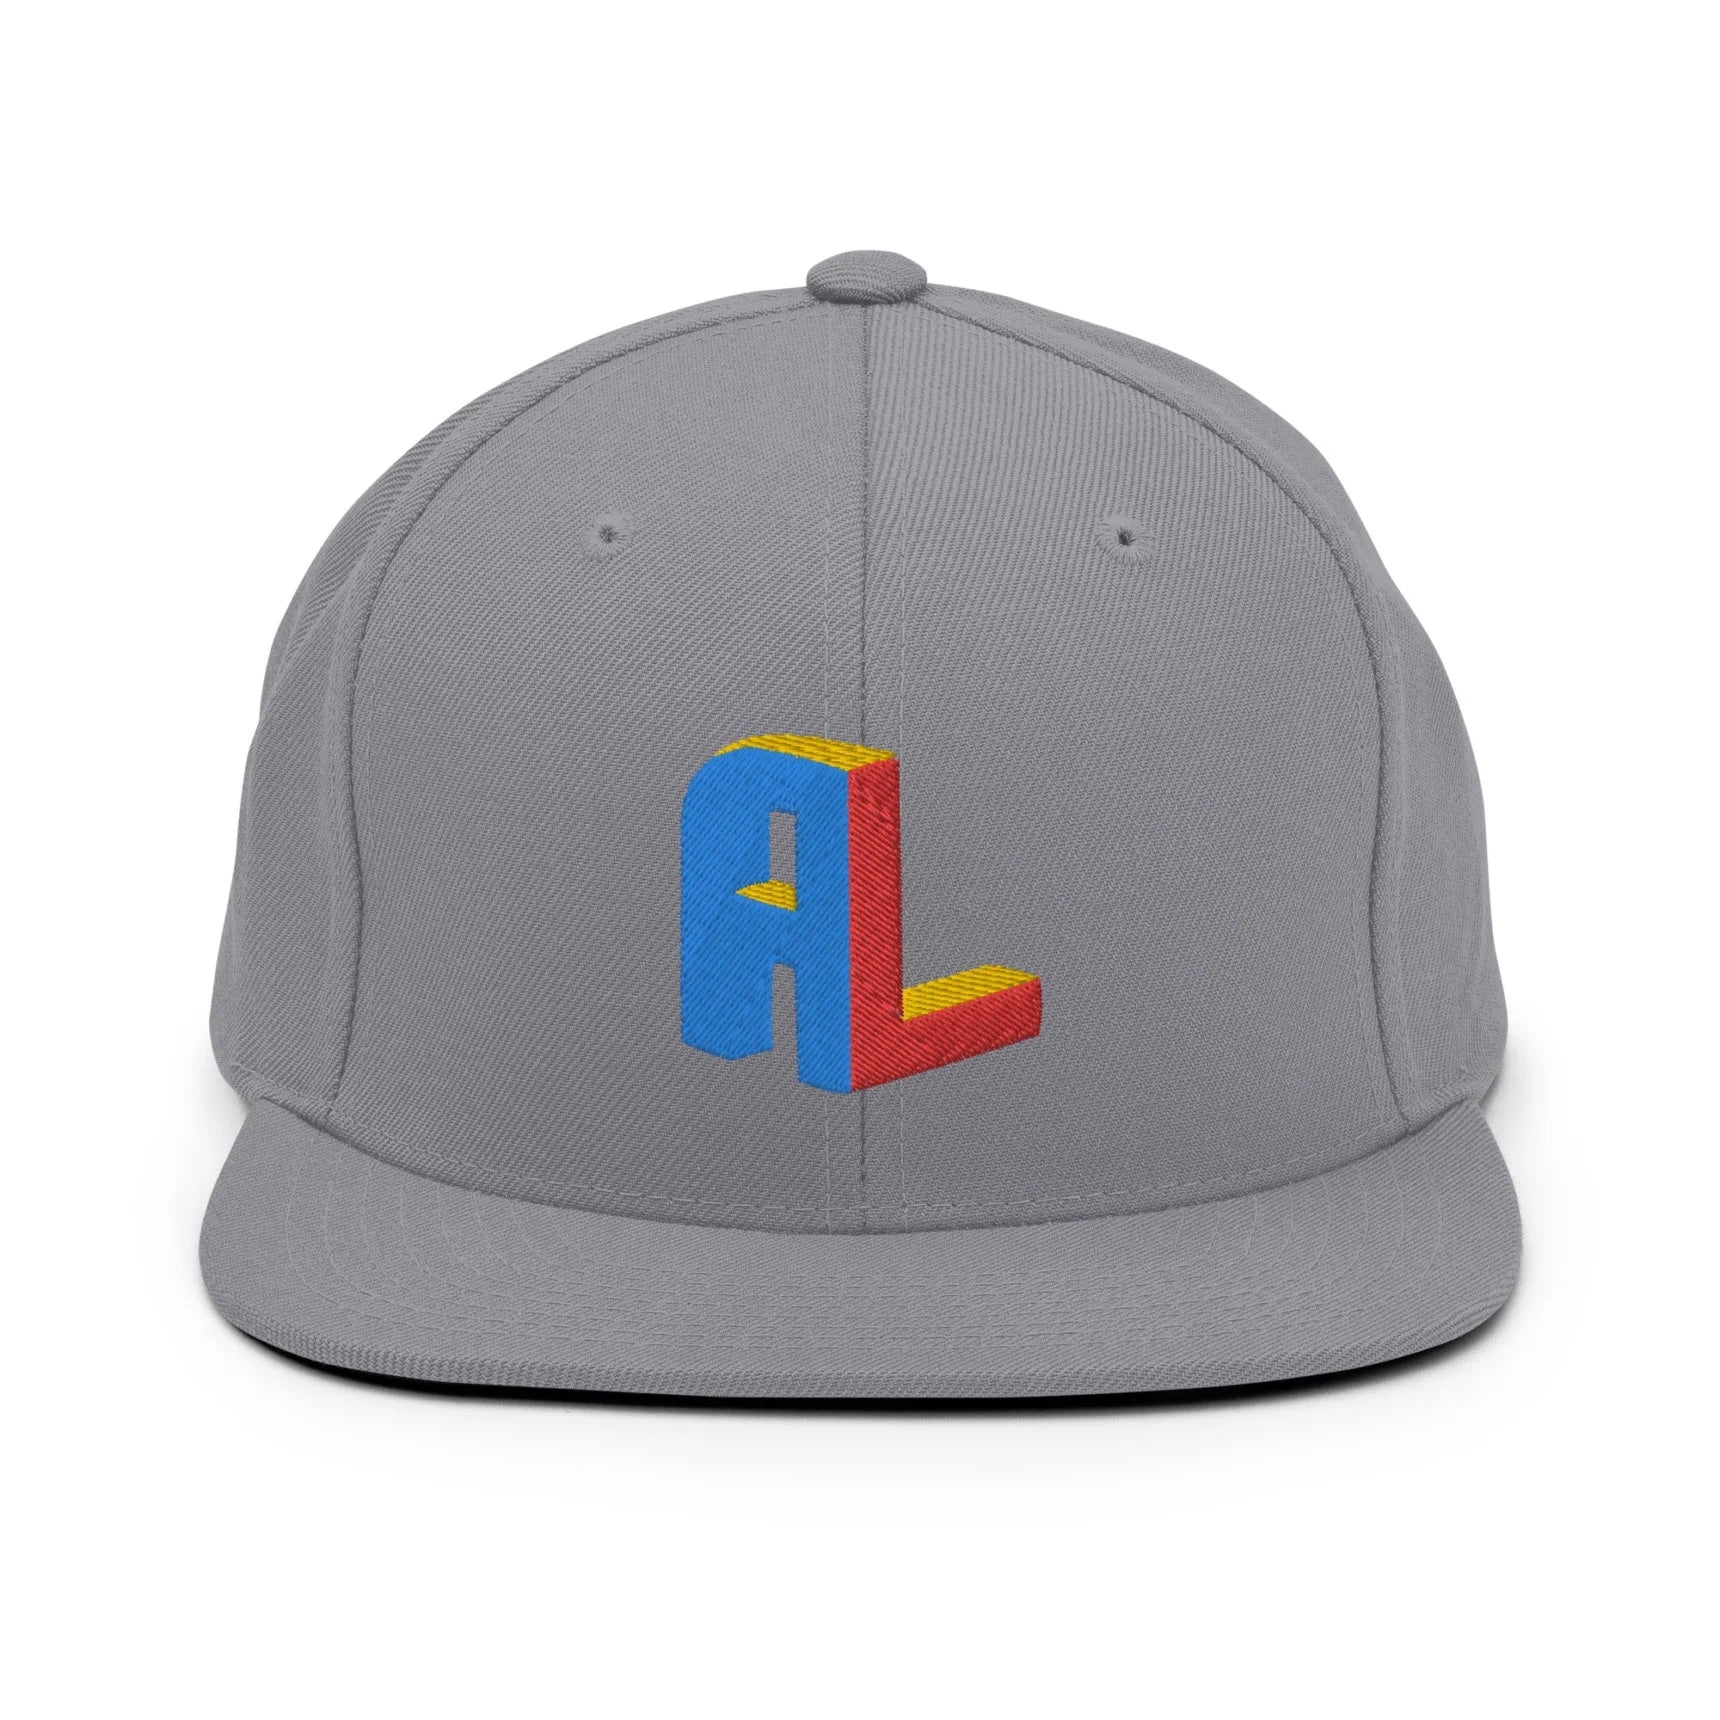 Ance Larmstrong ShowZone snapback hat in grey